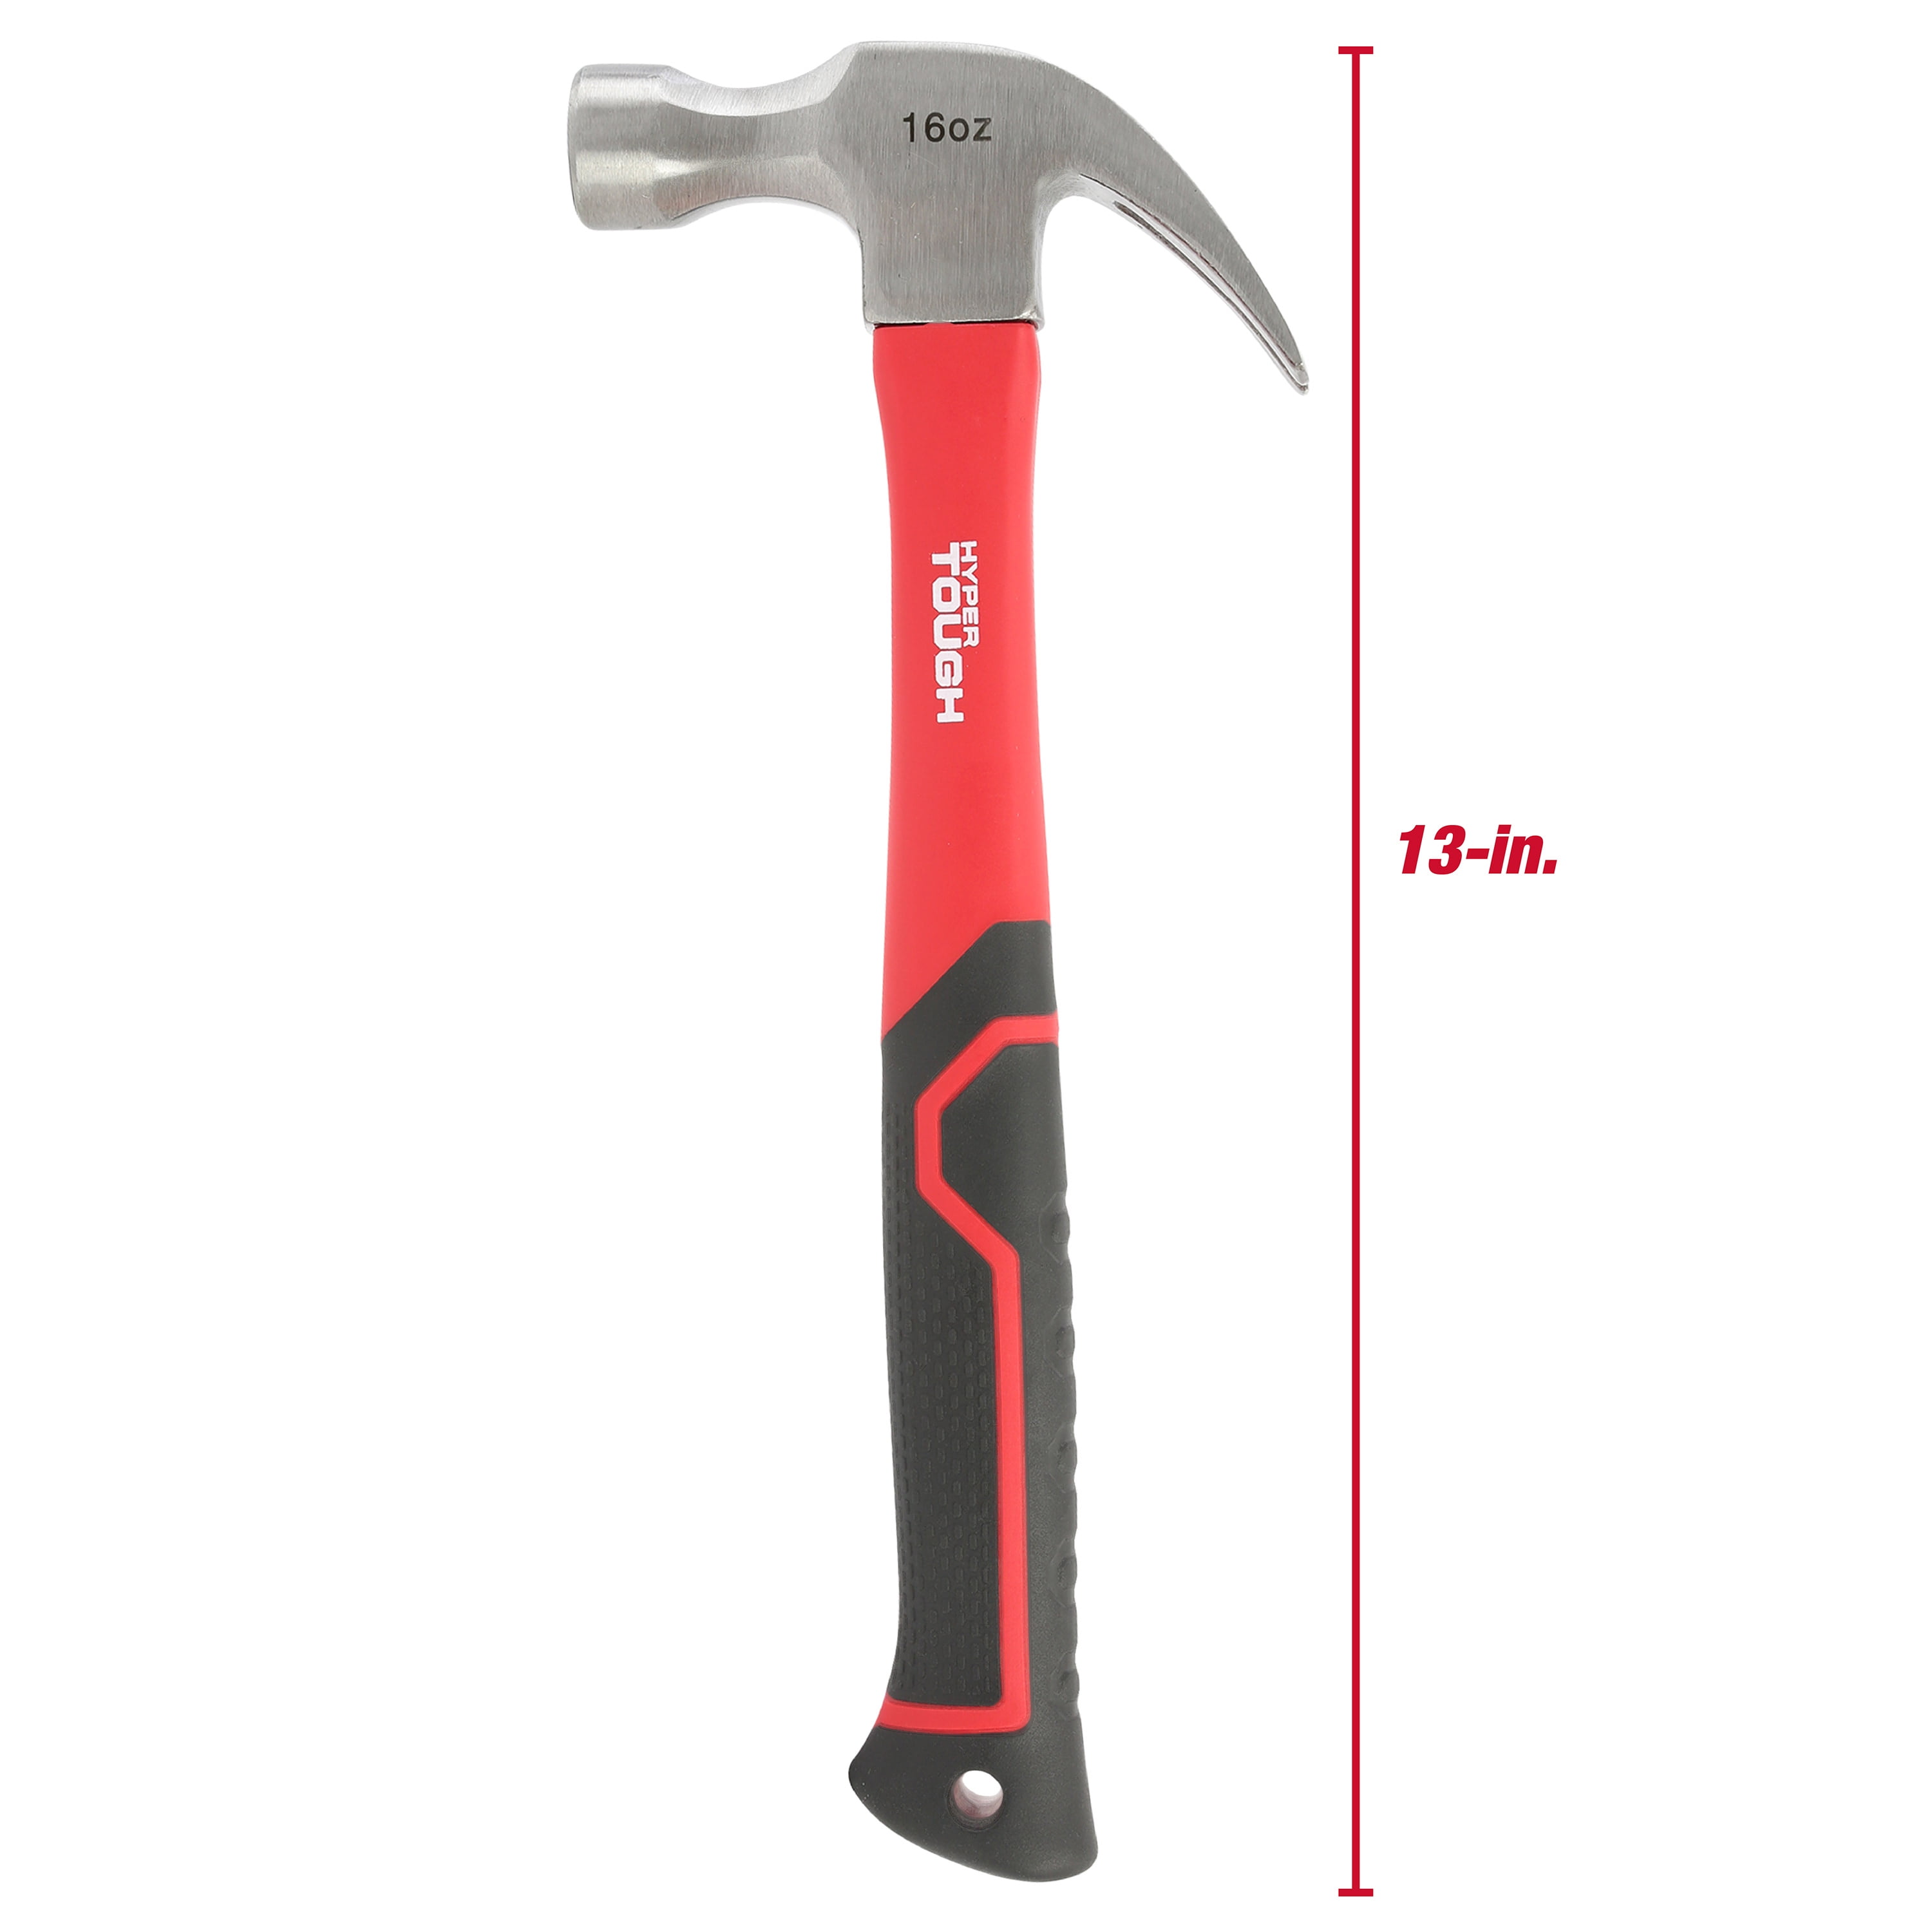 2 Pcs Hyper Tough TH20196Z and Unbranded Claw Hammer, Hand Tool